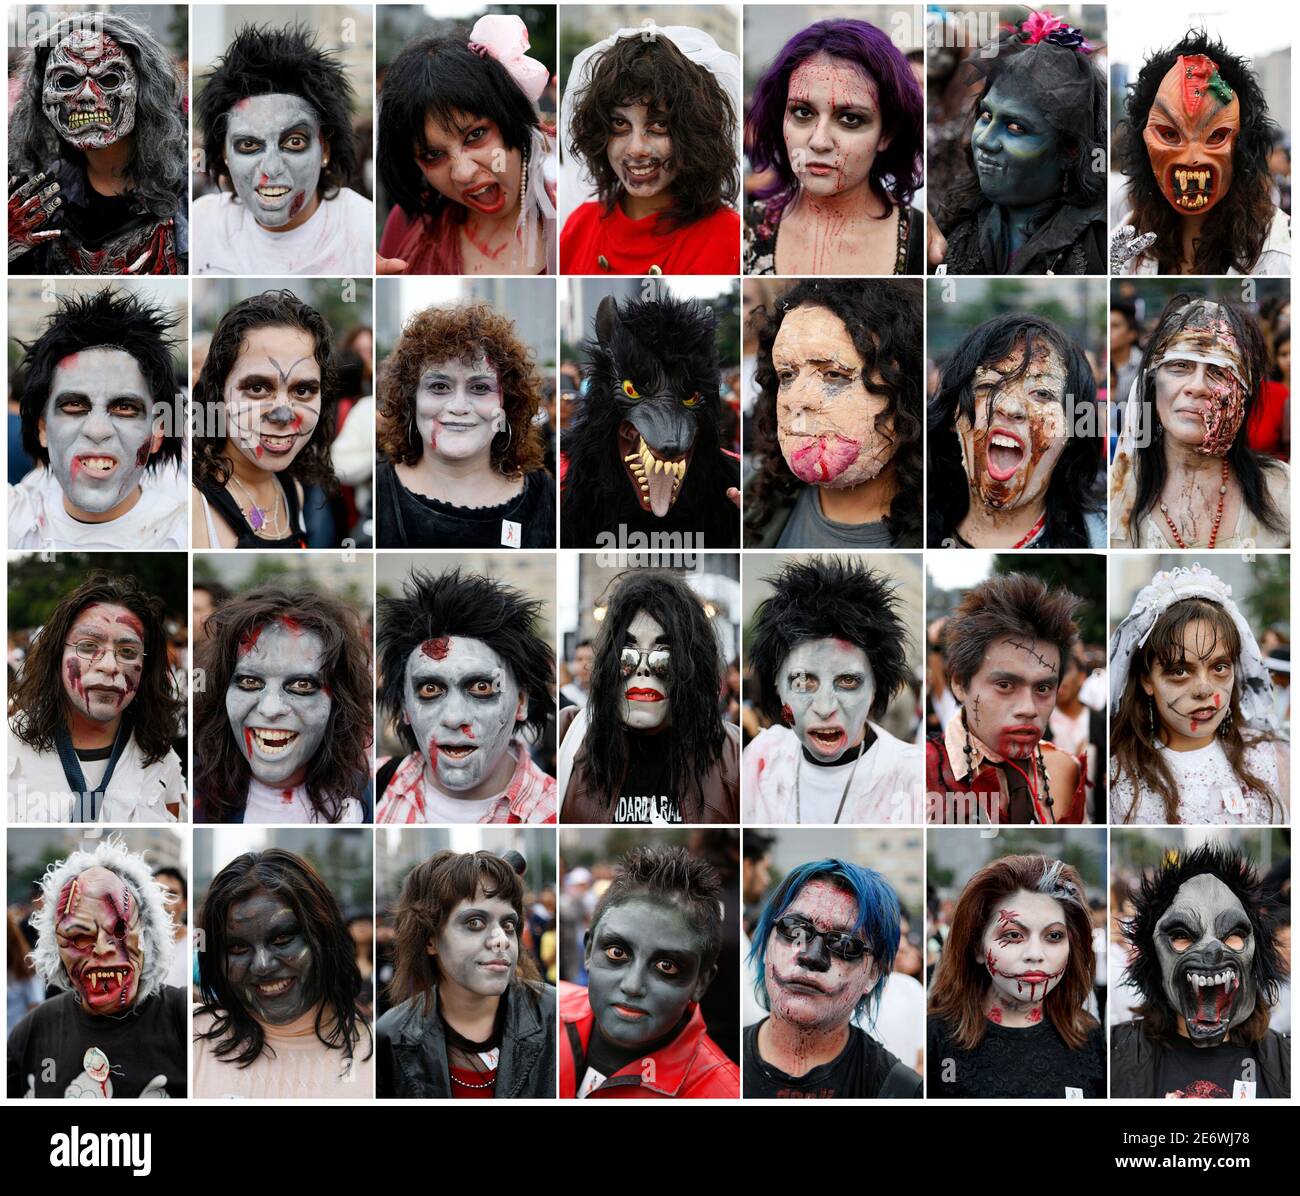 A combination picture shows Michael Jackson fans attending an event  celebrating the late singer's 51st birthday at the Monument of the  Revolution in Mexico City August 29, 2009. Over 12,000 fans danced